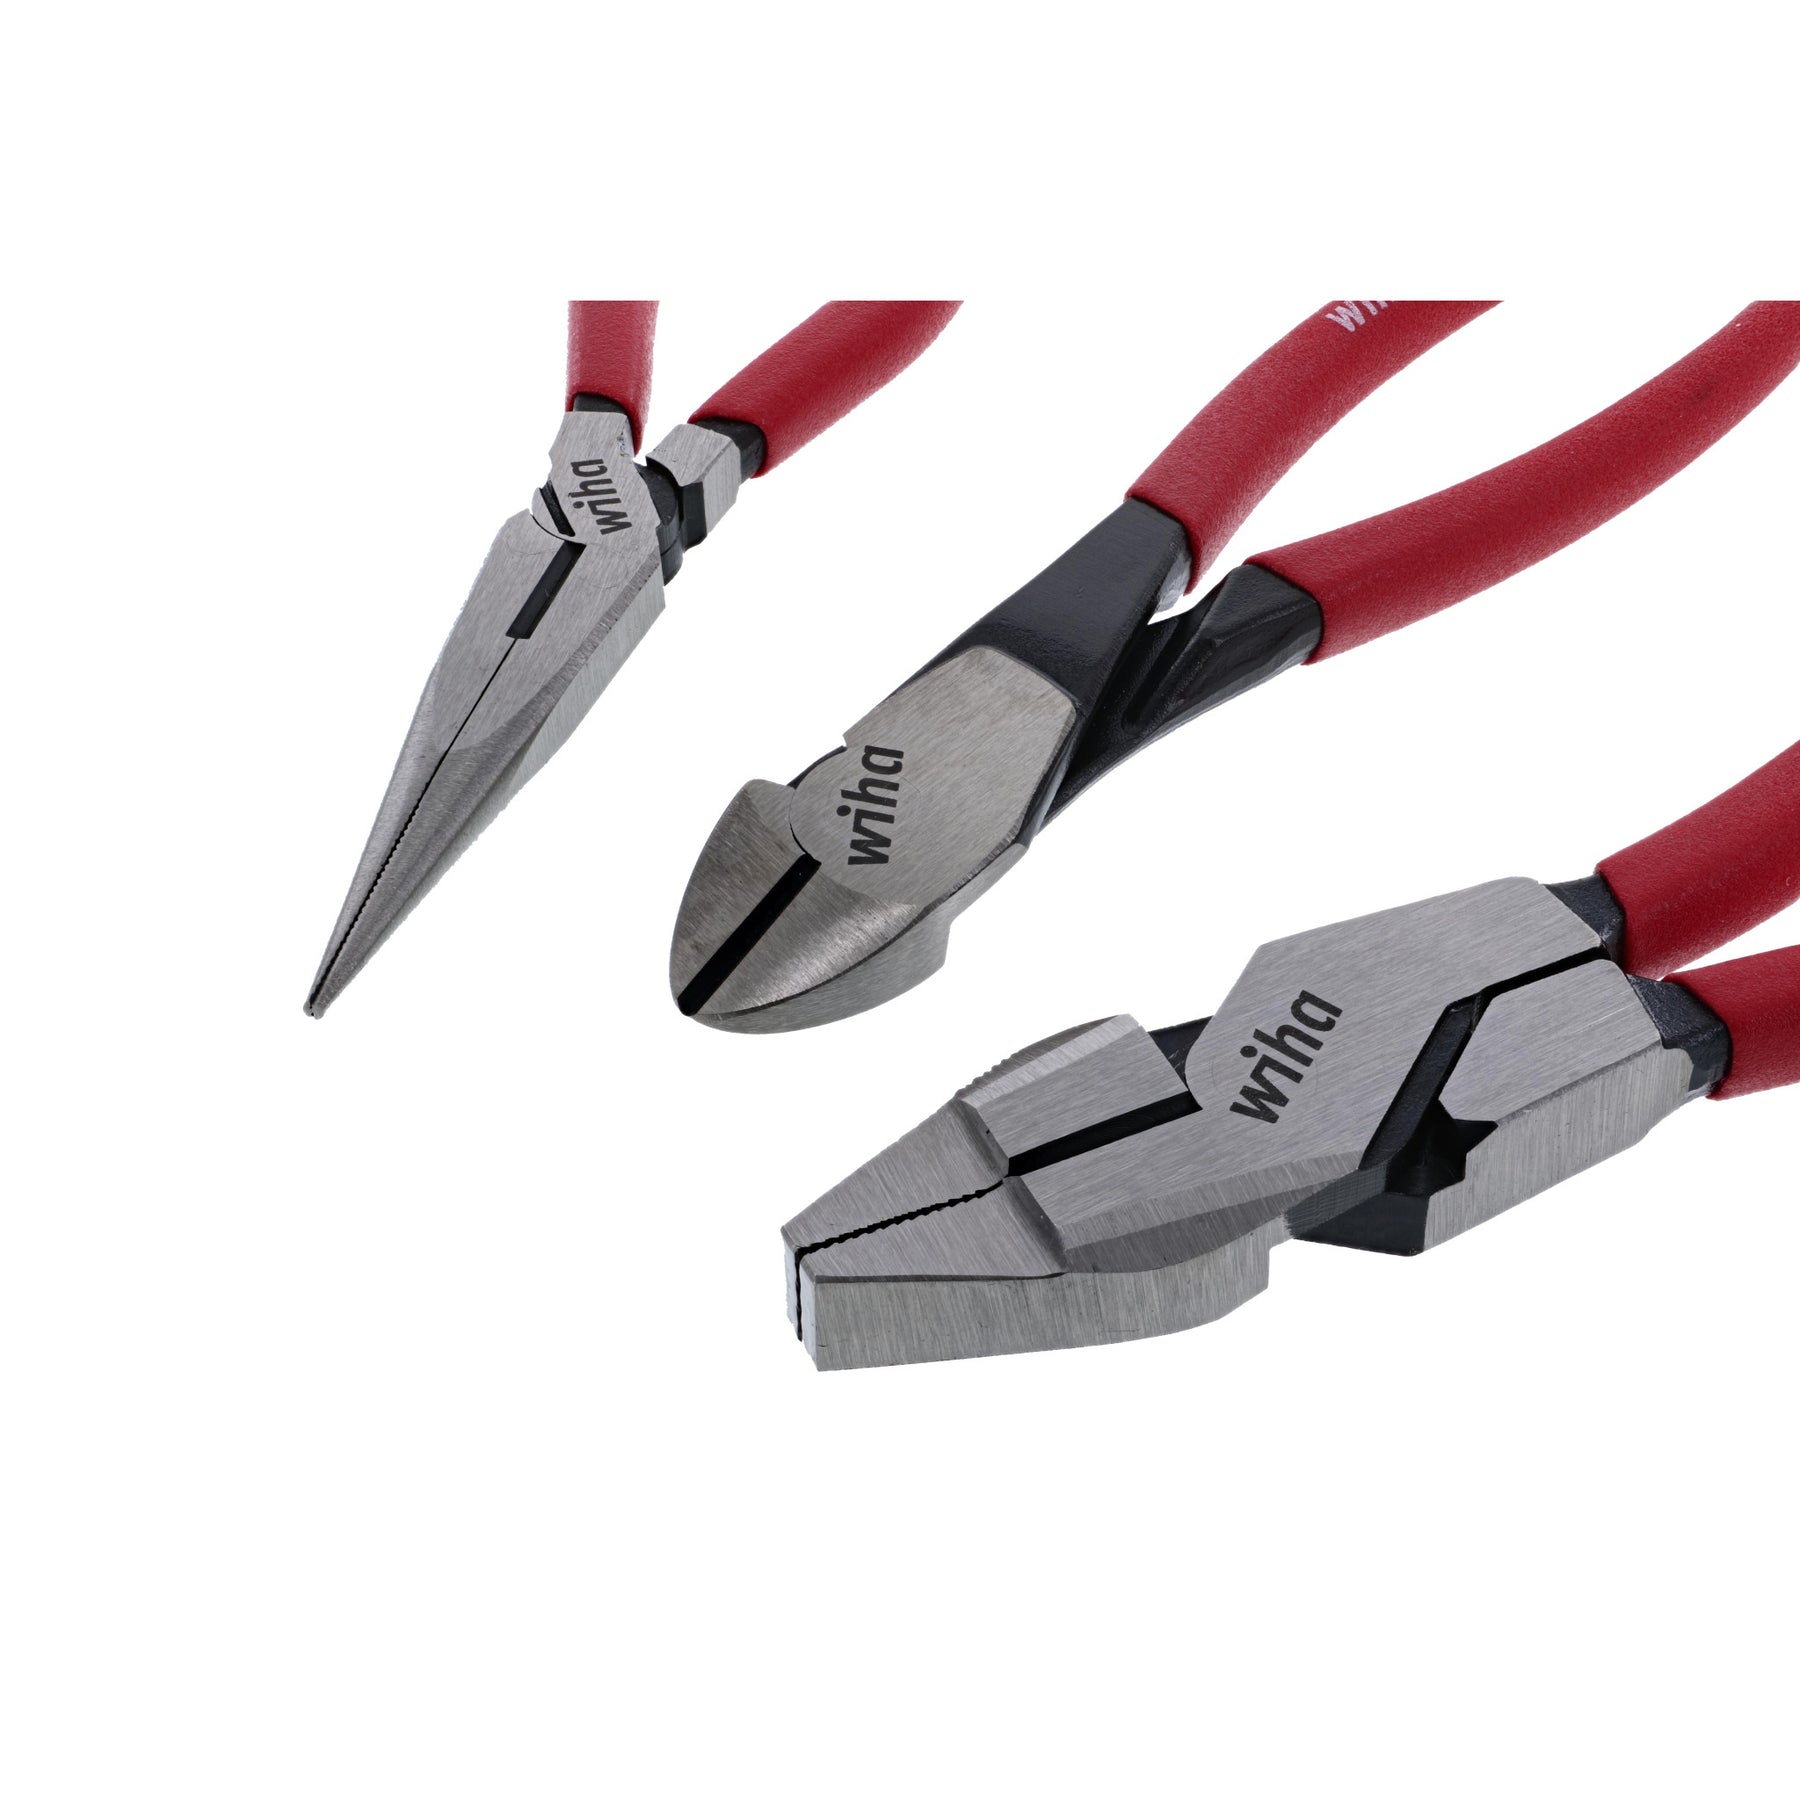 Wiha 32634 SoftGrip Pliers and Cutters Piece-Set